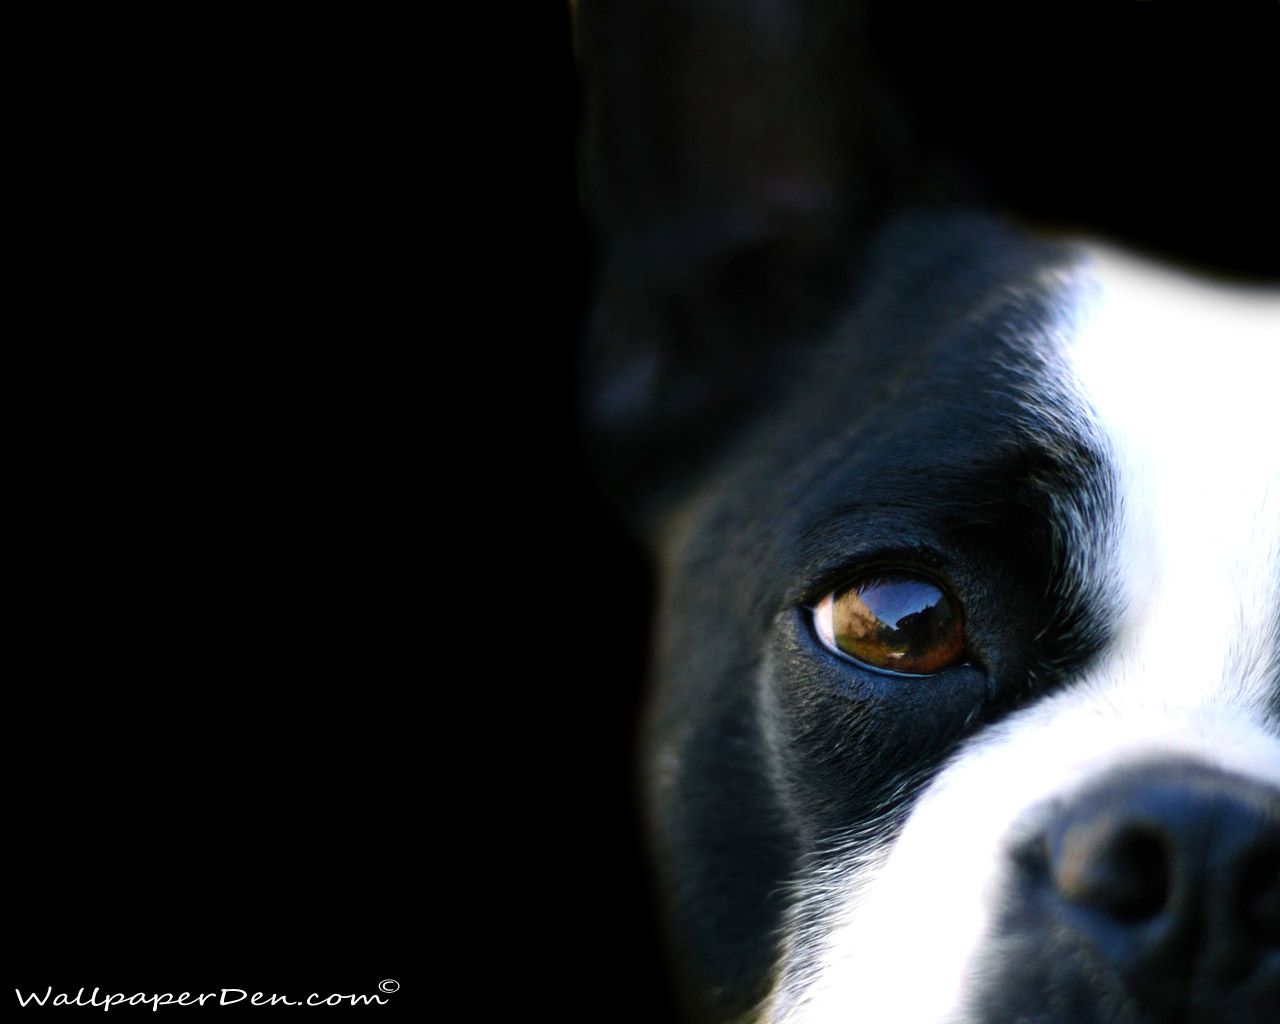 Black and white dog wallpaper 163 - The Dog Wallpaper - Best The